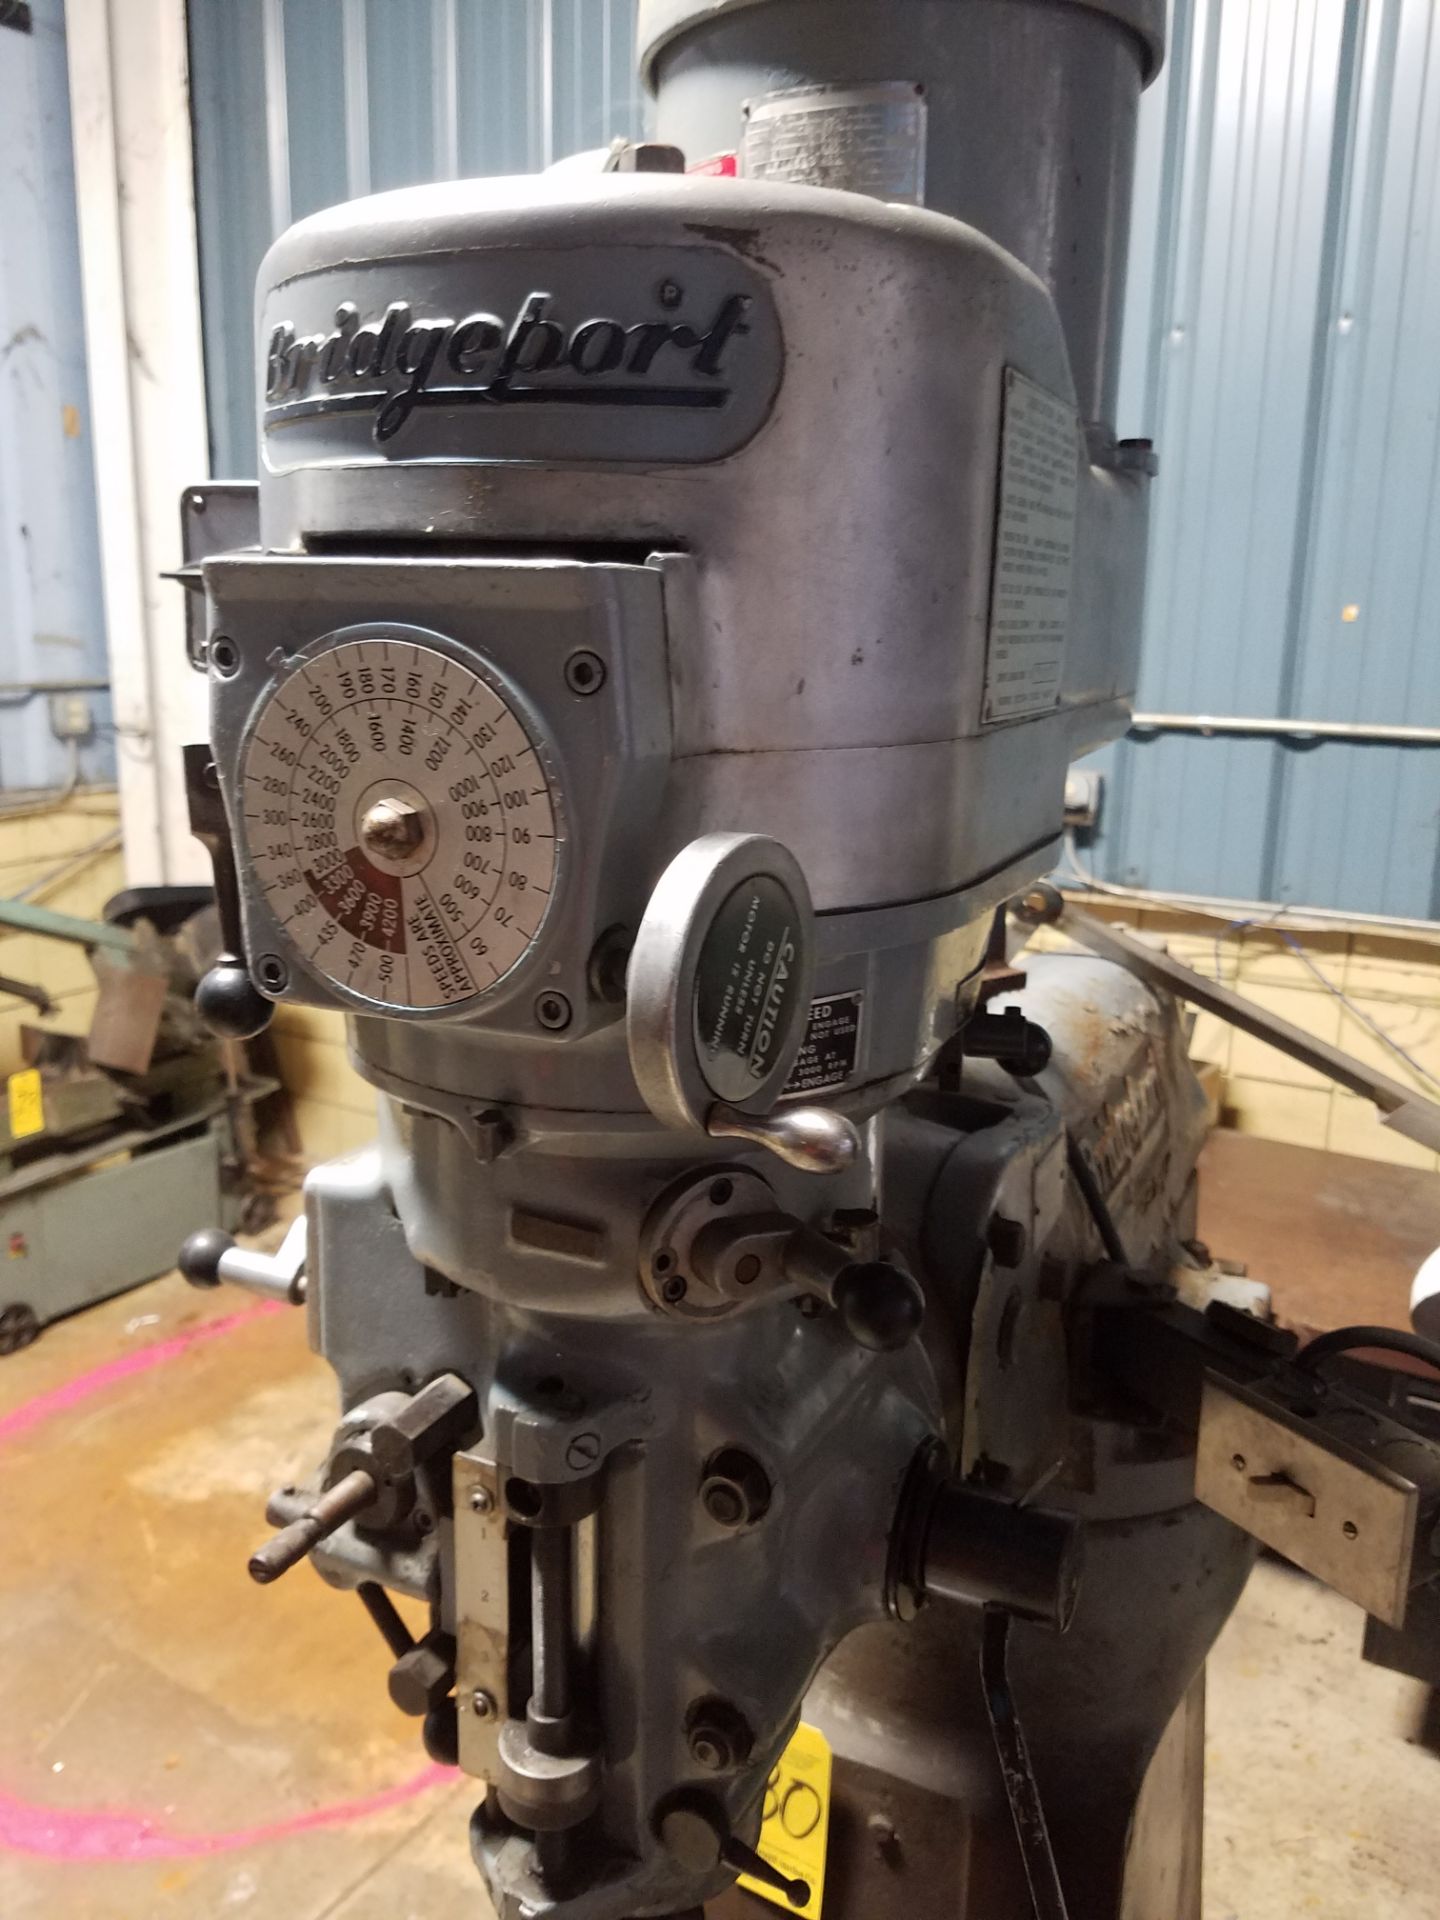 Bridgeport 1 1/2 HP Variable Speed Vertical Mill, s/n 12BR217032, Fagor D.R.O., Power Table Feed, - Image 3 of 4